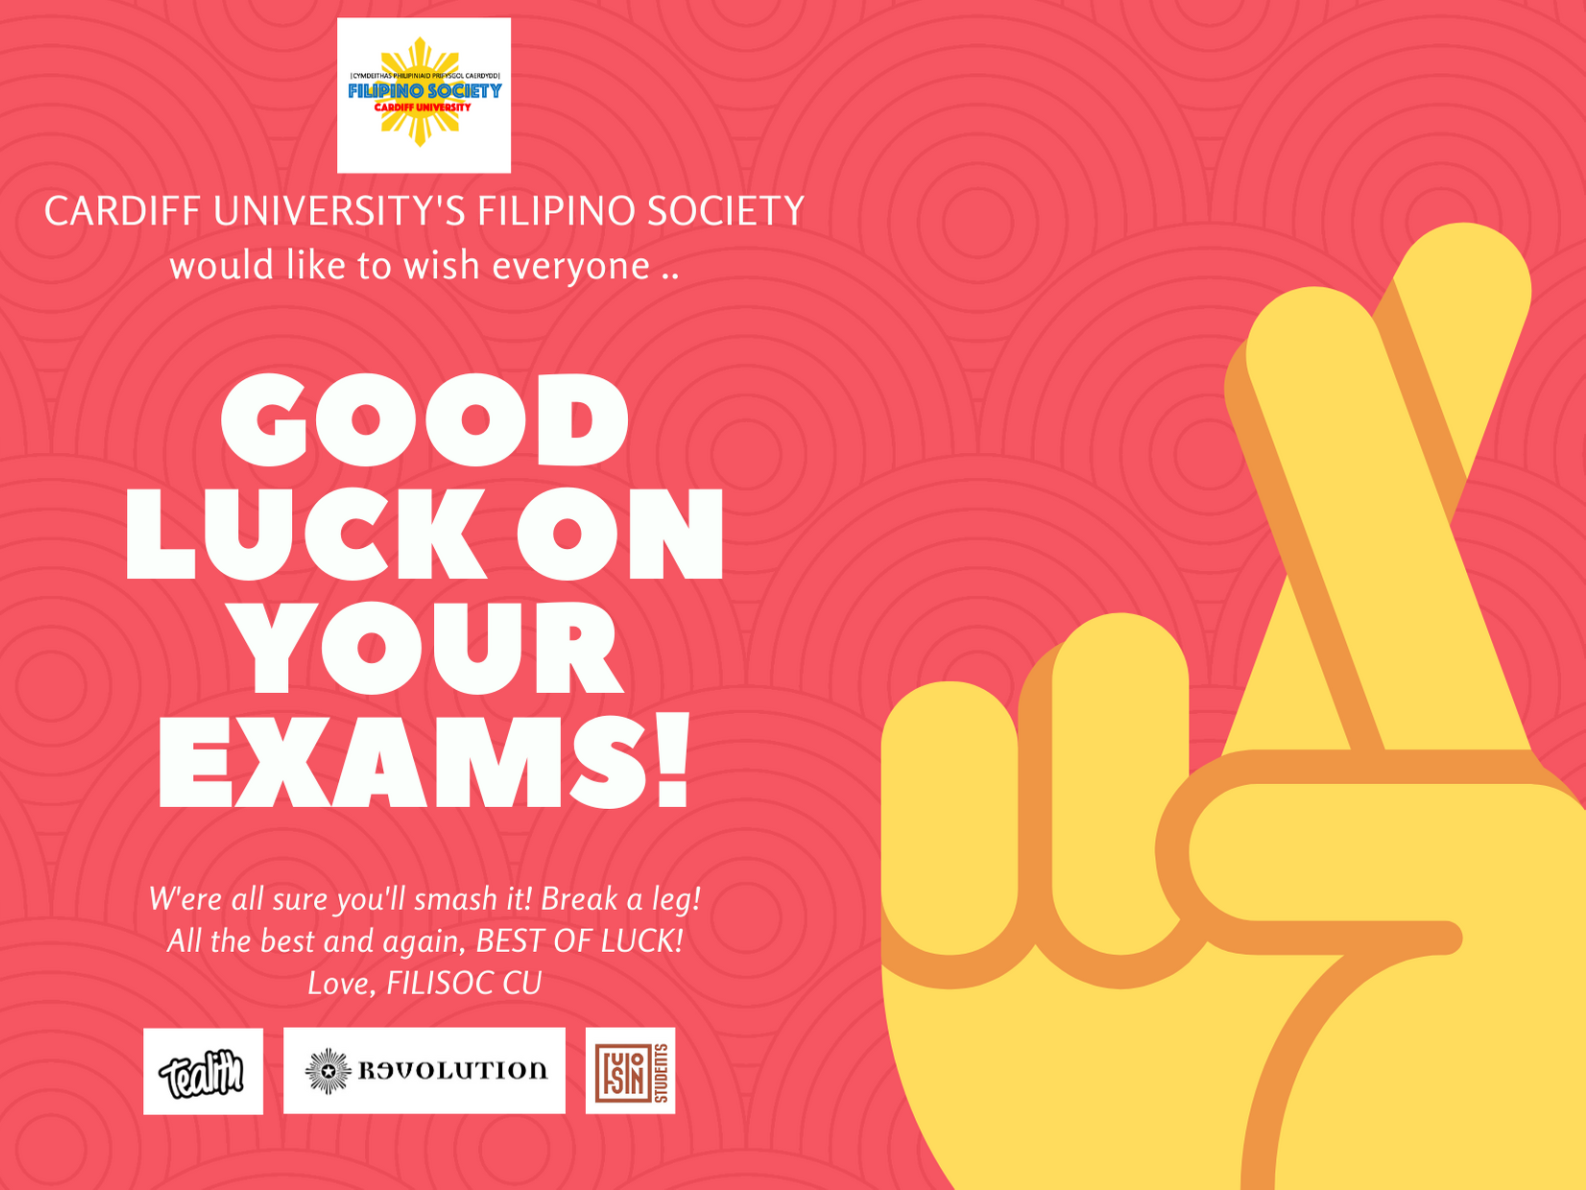 Filipino Society Good Luck Exam Poster 2 by Vince Mojares on Dribbble